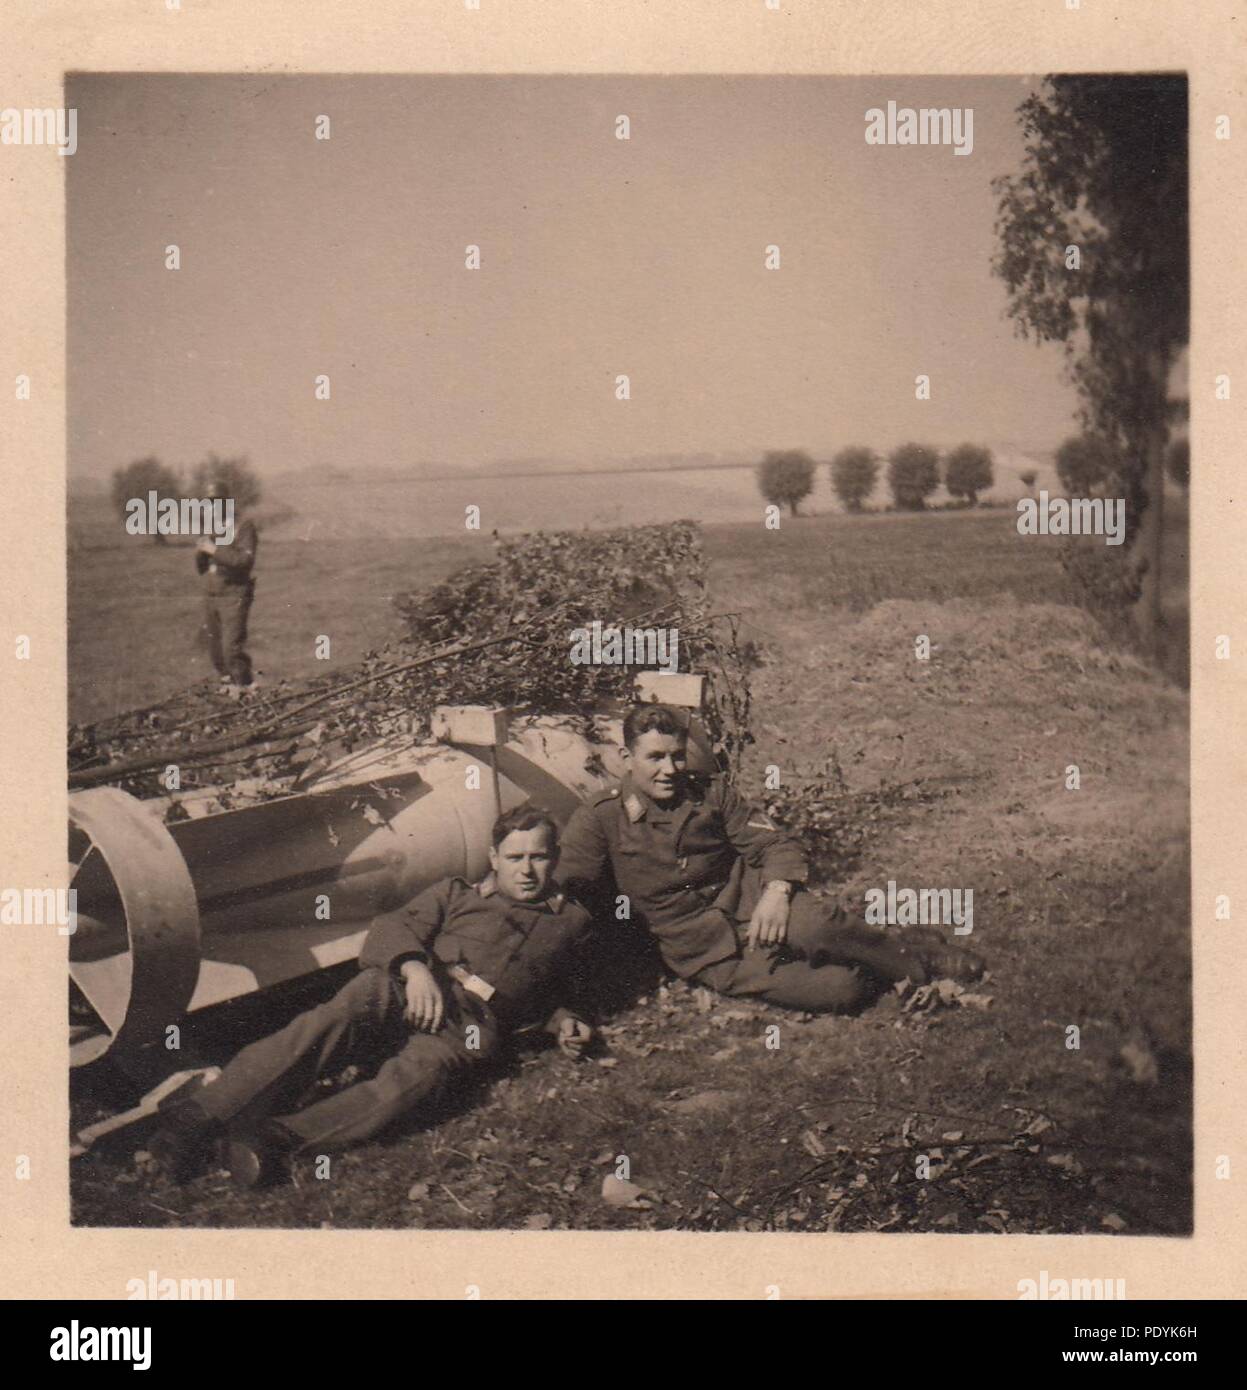 Image from the photo album of Feldwebel Willi Hoffmann of 5. Staffel, Kampfgeschwader 30: Gefreiter Willi Hoffmann and a comrade from 5./KG 30 relax beside a 500kg bomb, May 1940. Stock Photo